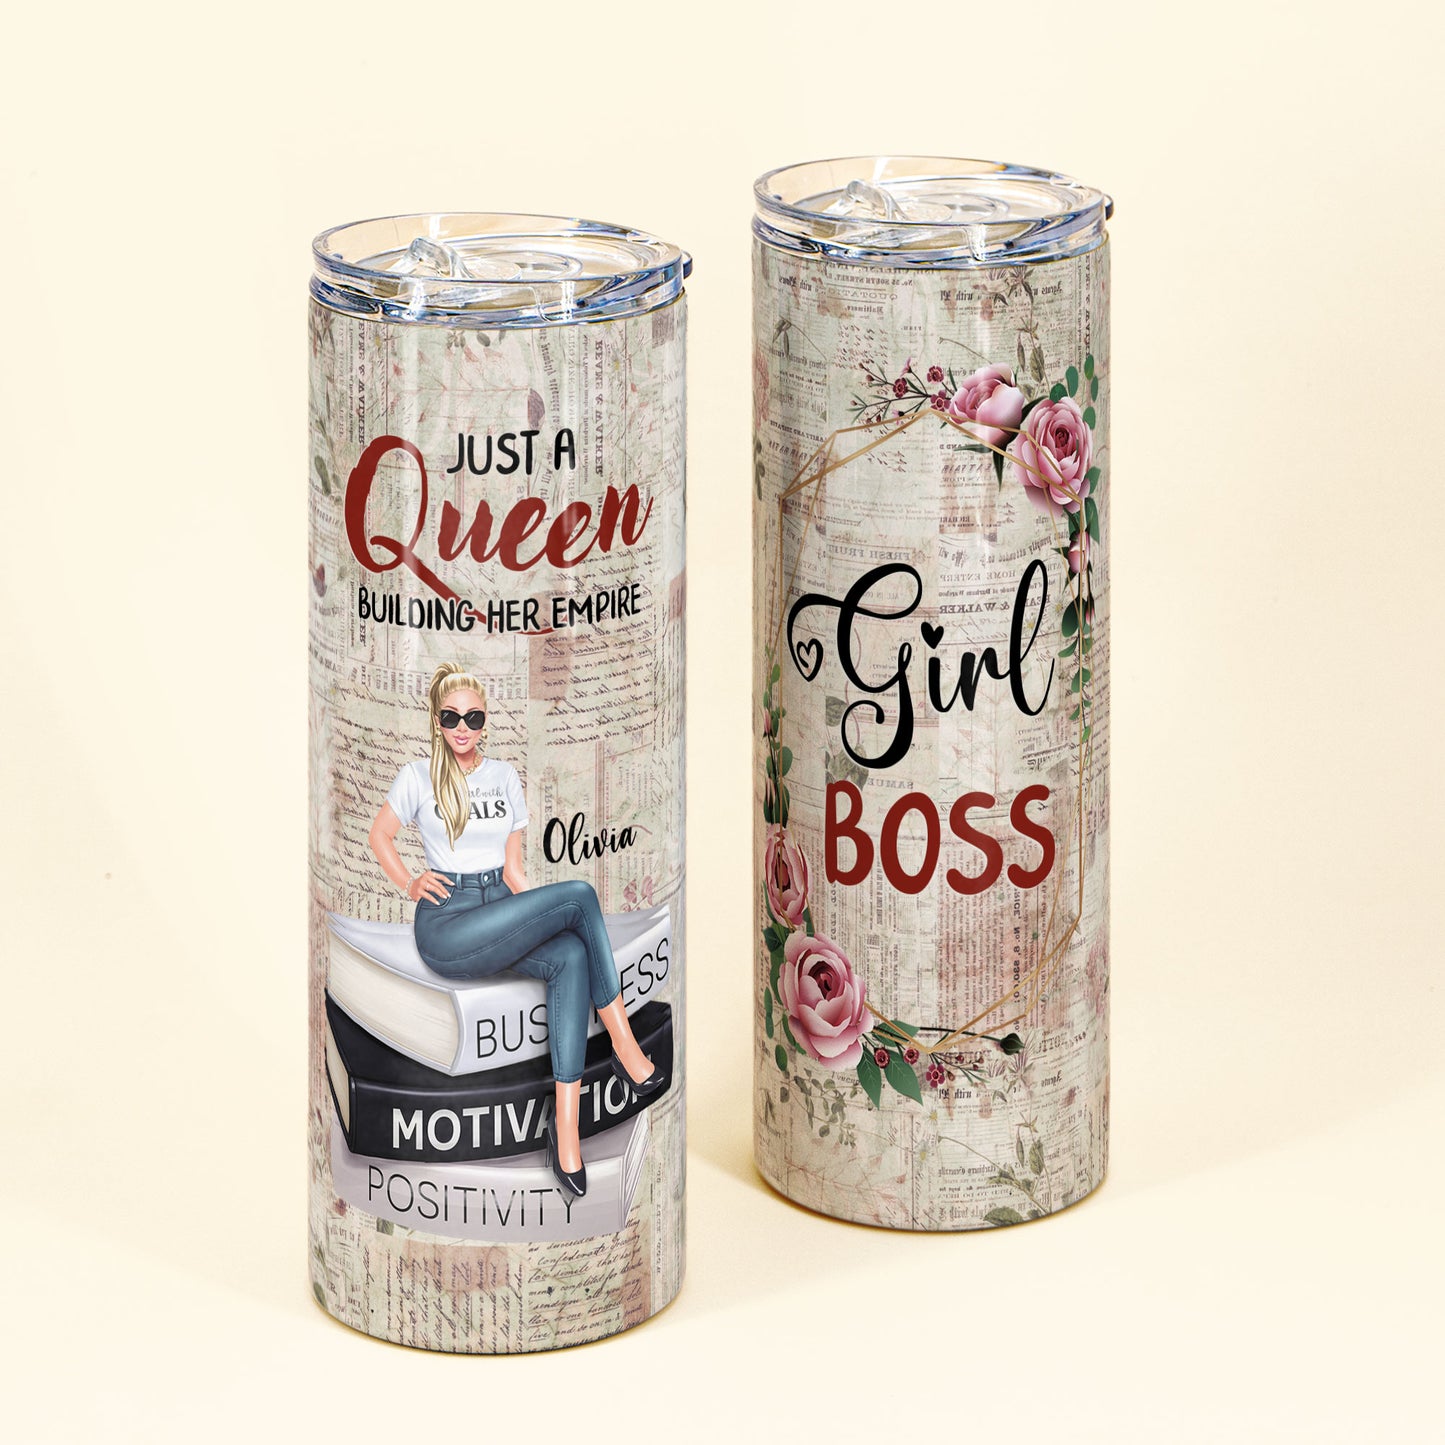 Just A Queen Building Her Empire - Personalized Skinny Tumbler - BirthdayGift For Her, Girl, Woman, Boss Babe